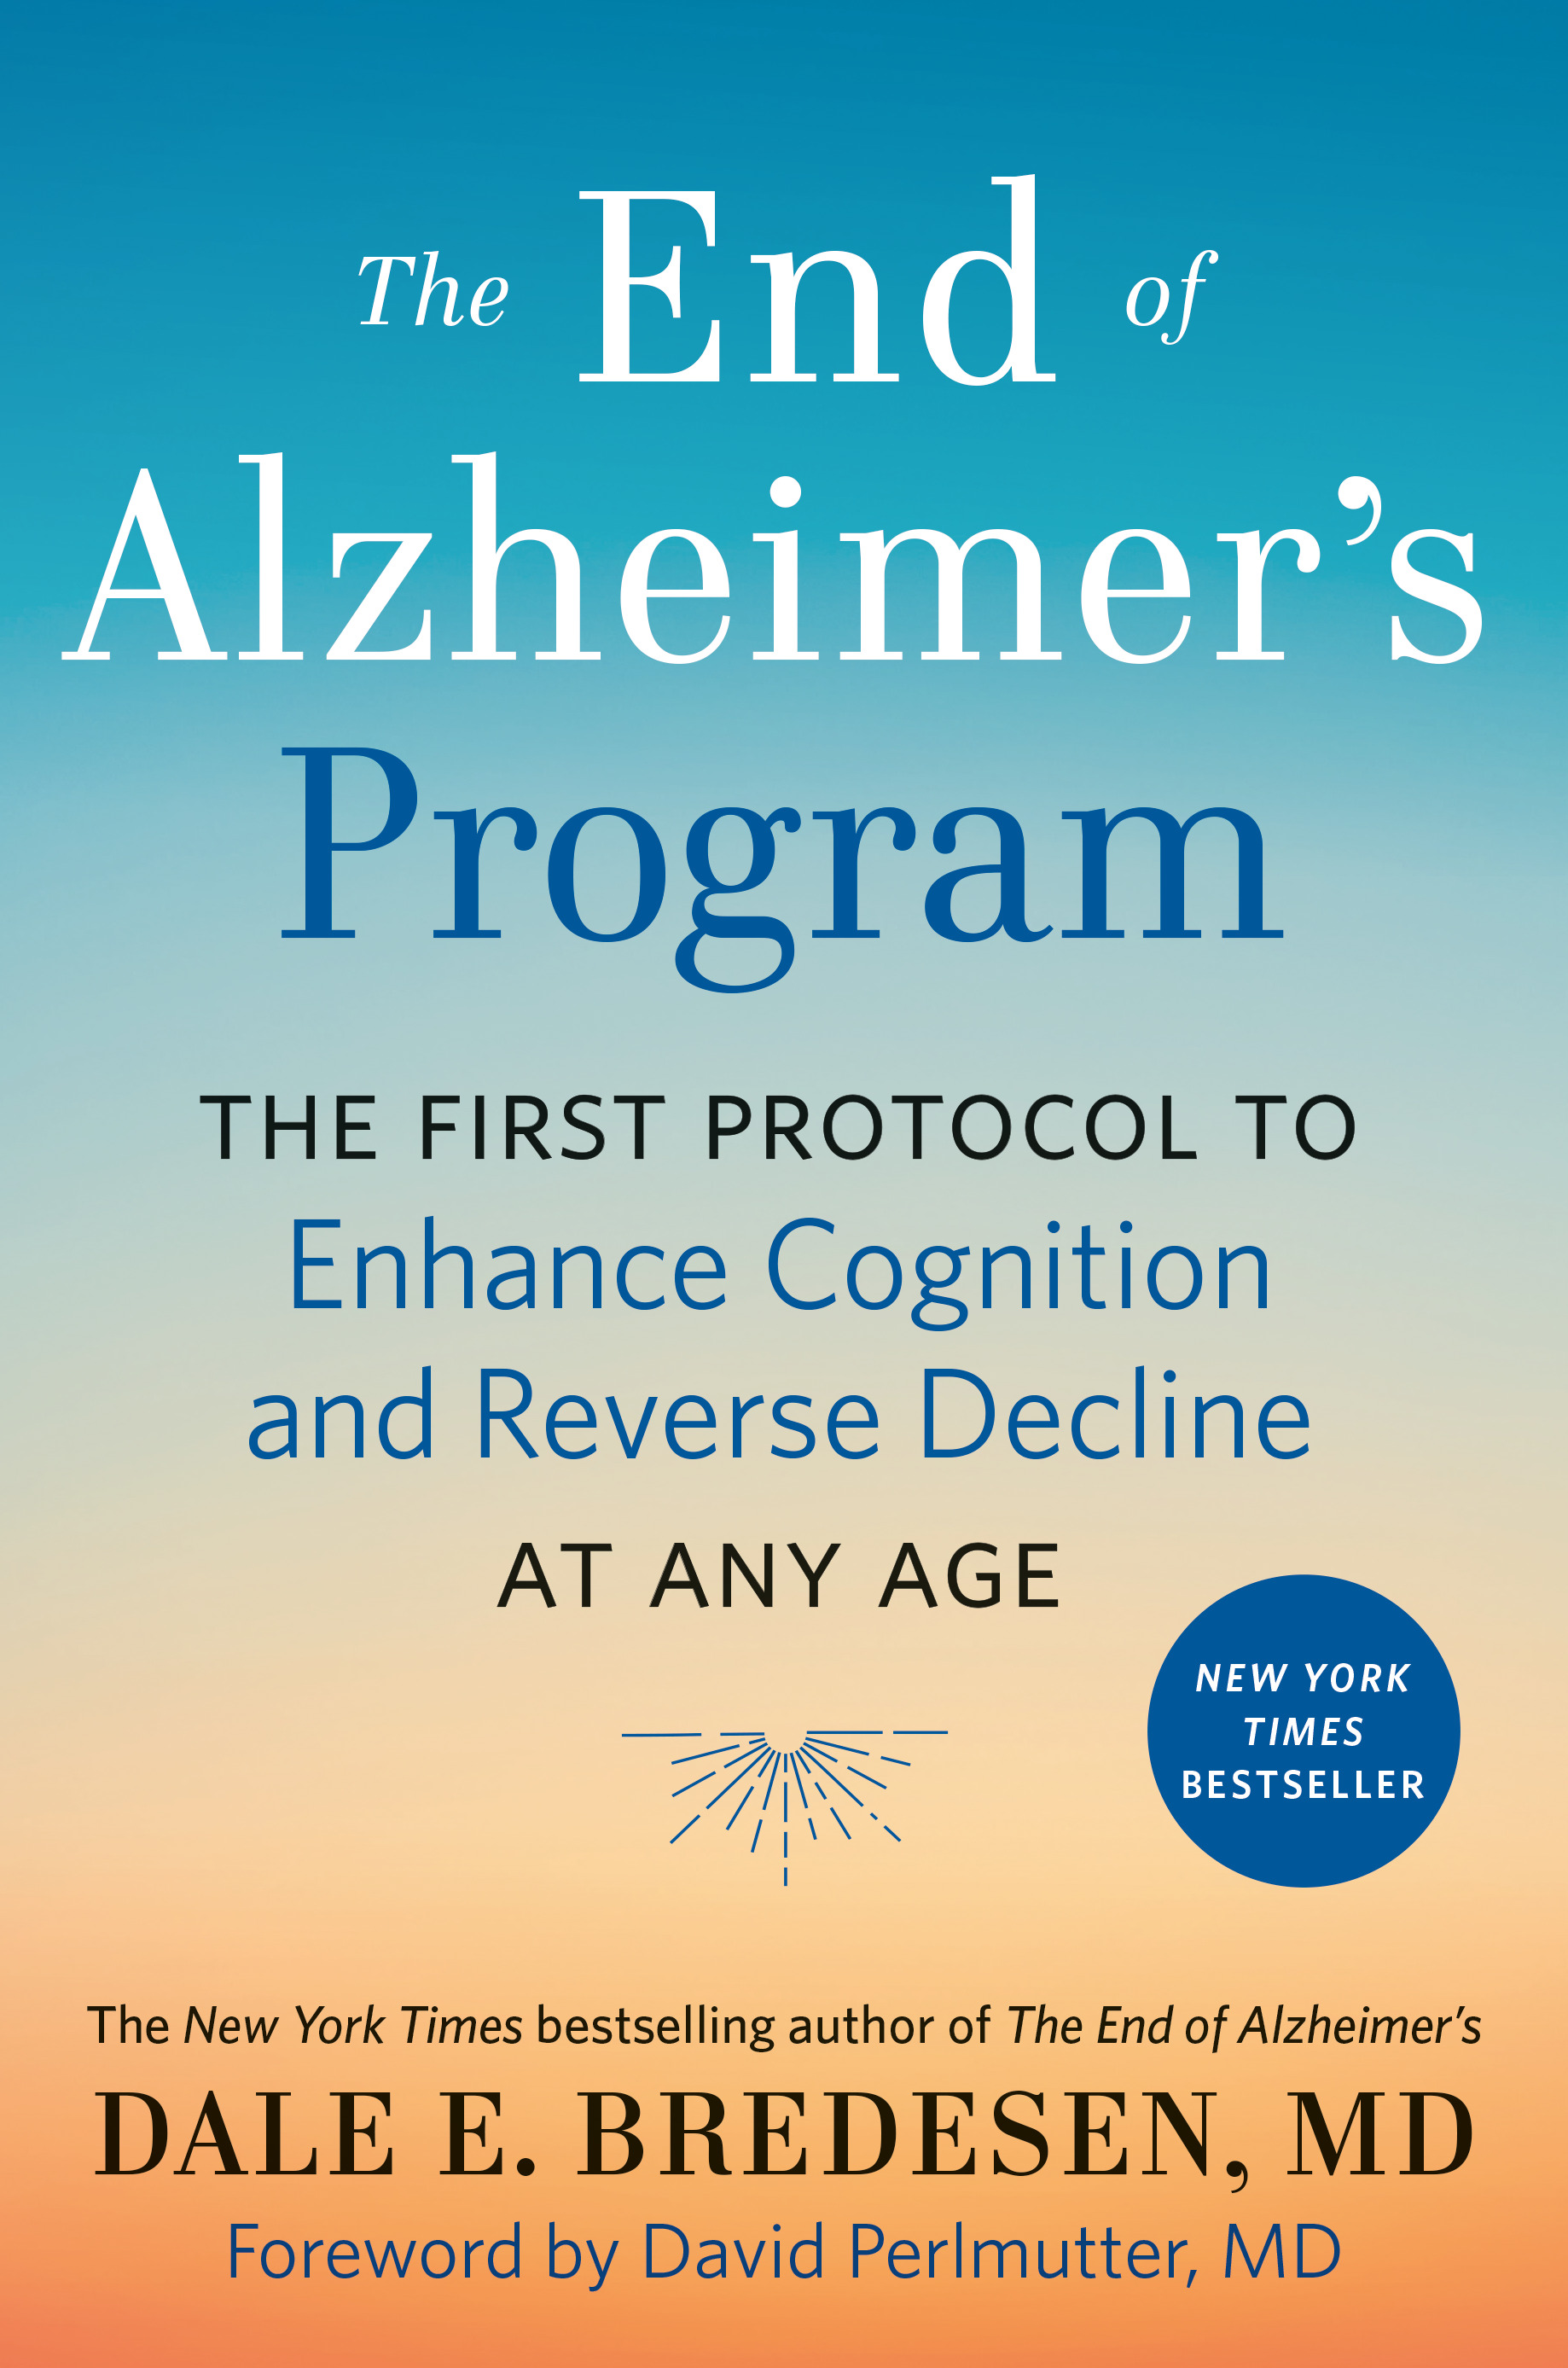 The End of Alzheimer's Program : The First Protocol to Enhance Cognition and Reverse Decline at Any Age | Bredesen, Dale